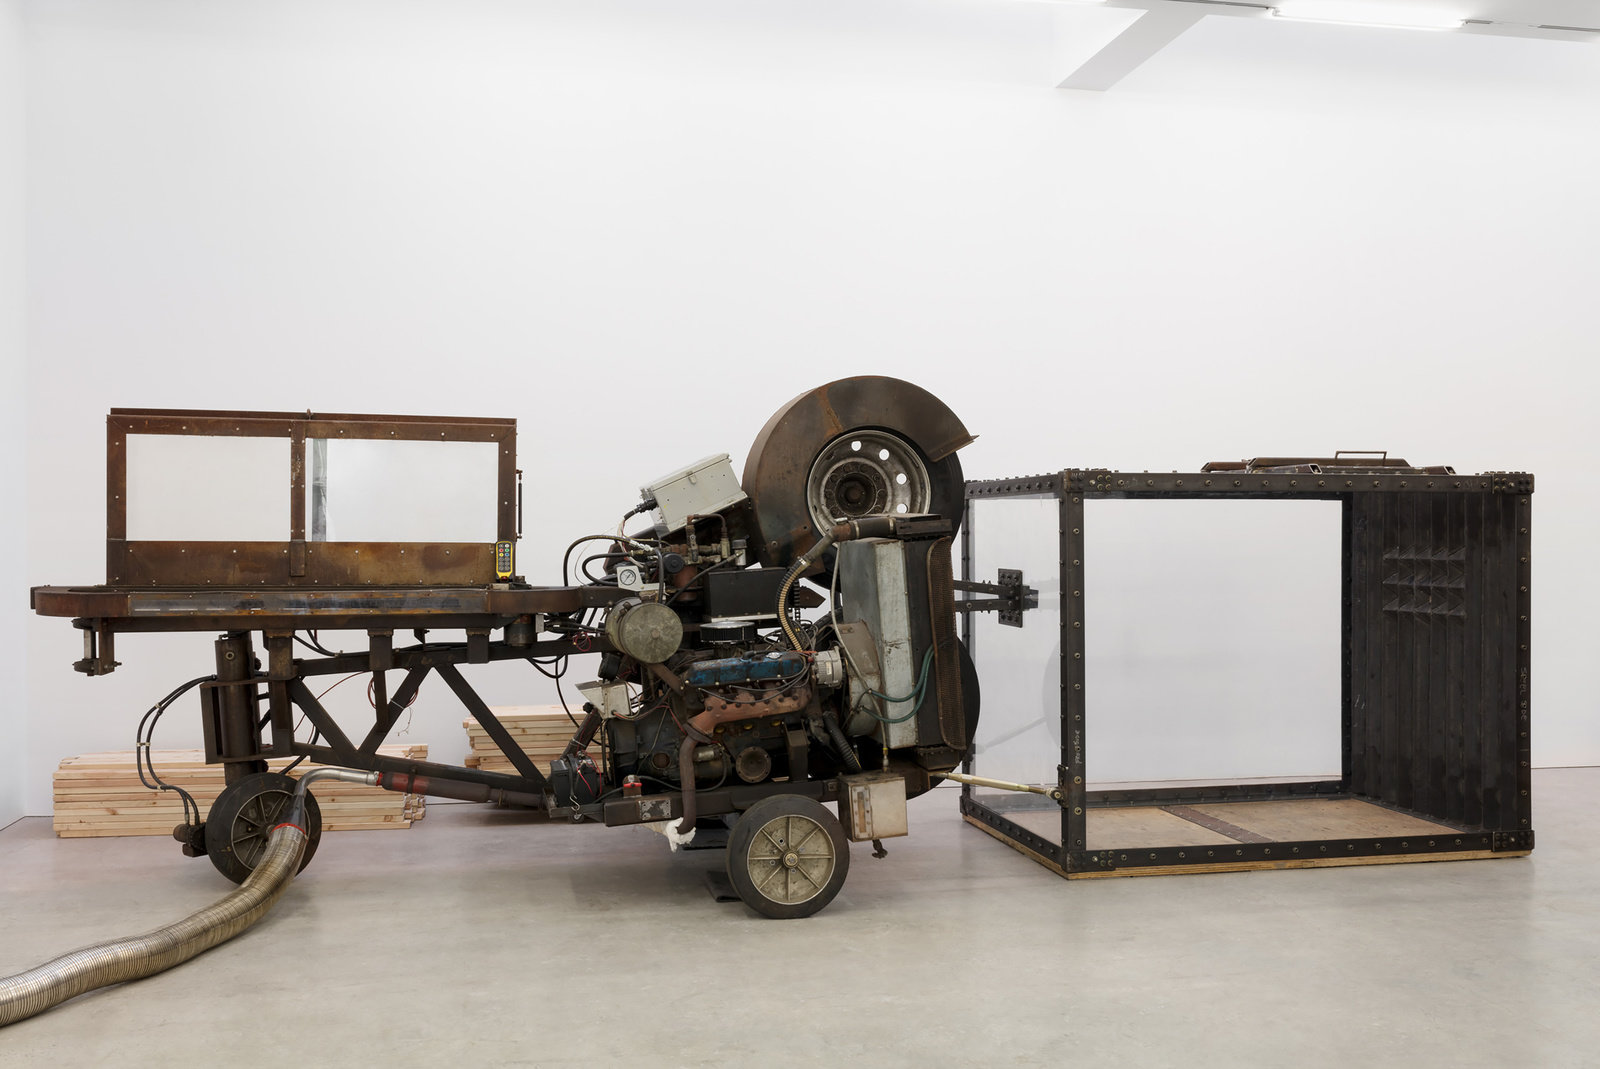 Srl, pitching machine (view 2), 1999 2017, steel, cast iron, aluminum, rubber, plastic and remote control, 98 x 87 x 179 in., 248.9 x 221 x 454.7 cm, cnon 59.697 pierre le hors